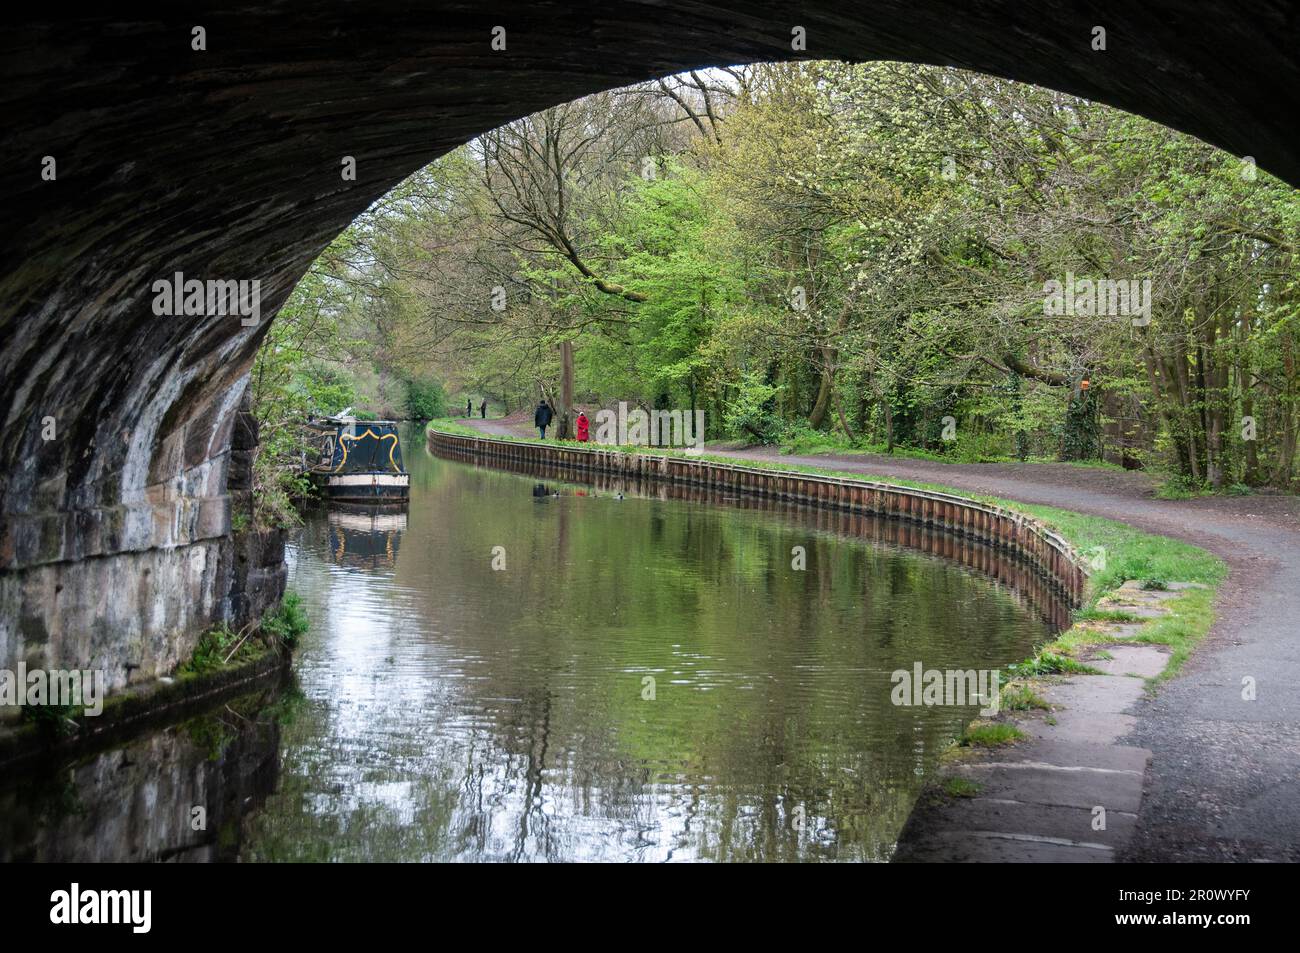 Around the UK - Leeds to Liverpool Canal Stock Photo